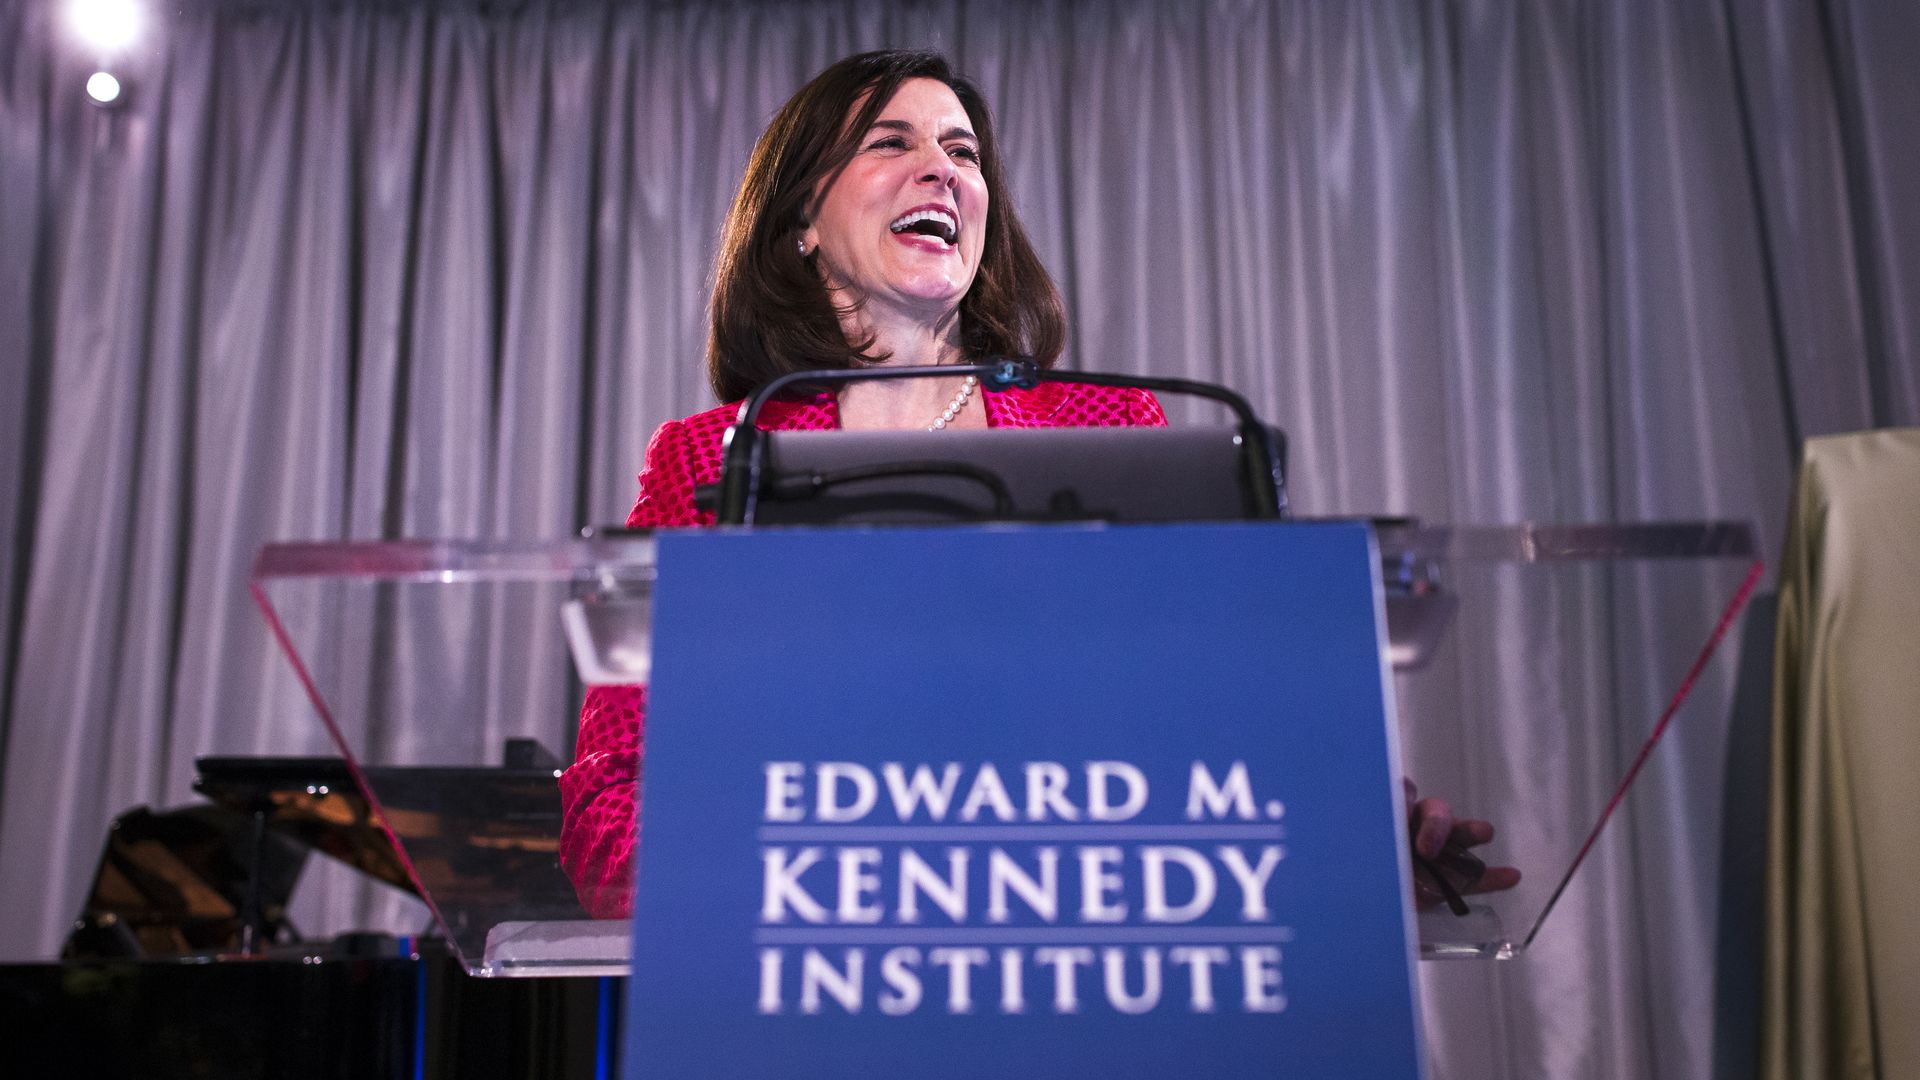 Vicki Kennedy is shown laughing.